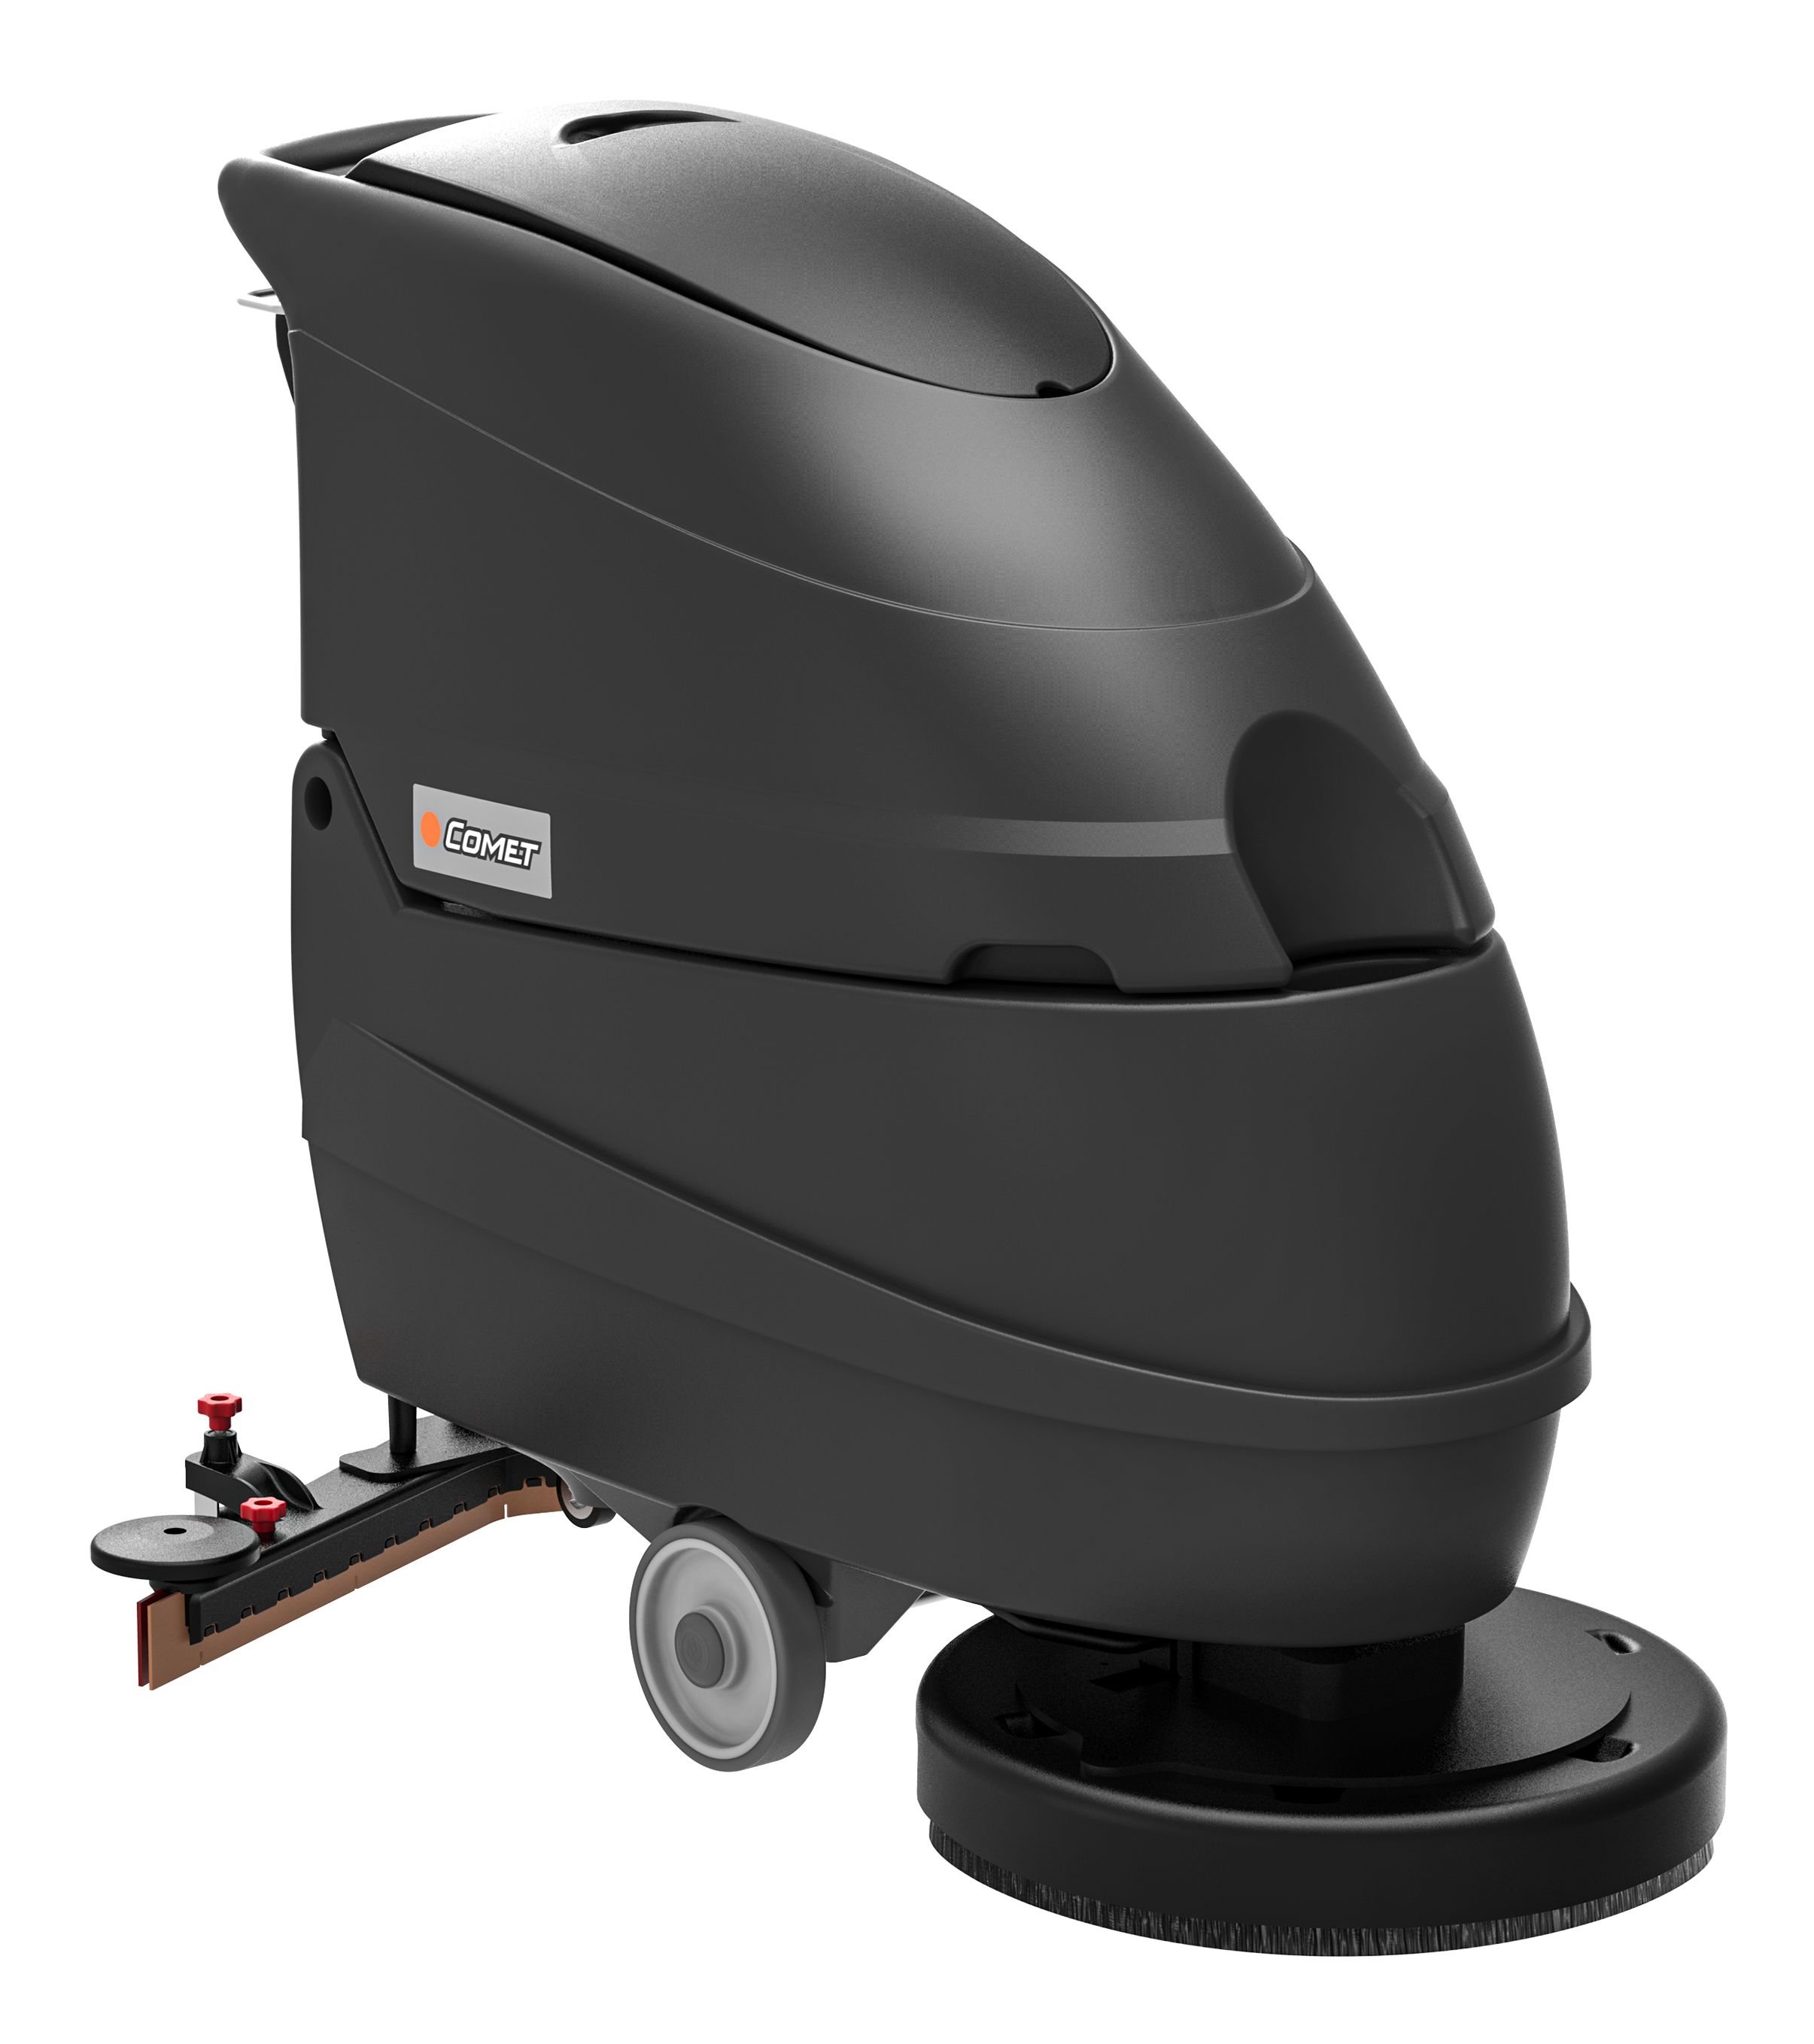 COMET CPS 50: THE MAN-BEHIND SCRUBBER DRYER FOR MEDIUM-SIZED SURFACES